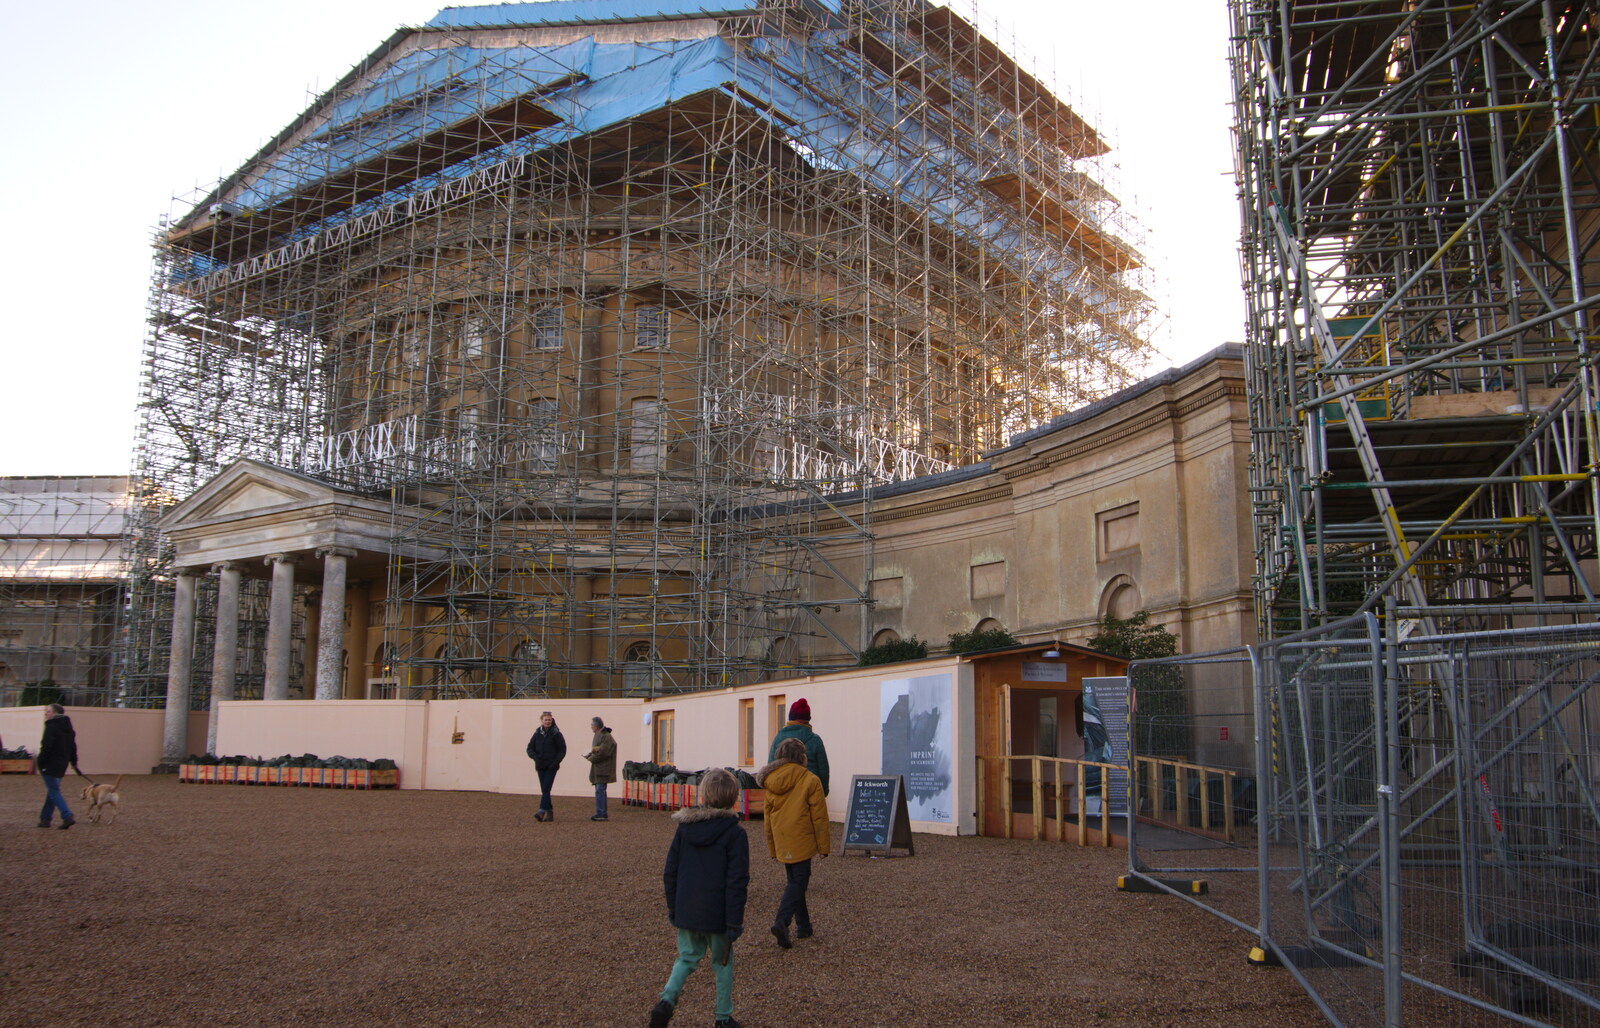 Our first close-up of the truly epic scaffolding from The Tiles of Ickworth House, Horringer, Suffolk - 30th November 2019